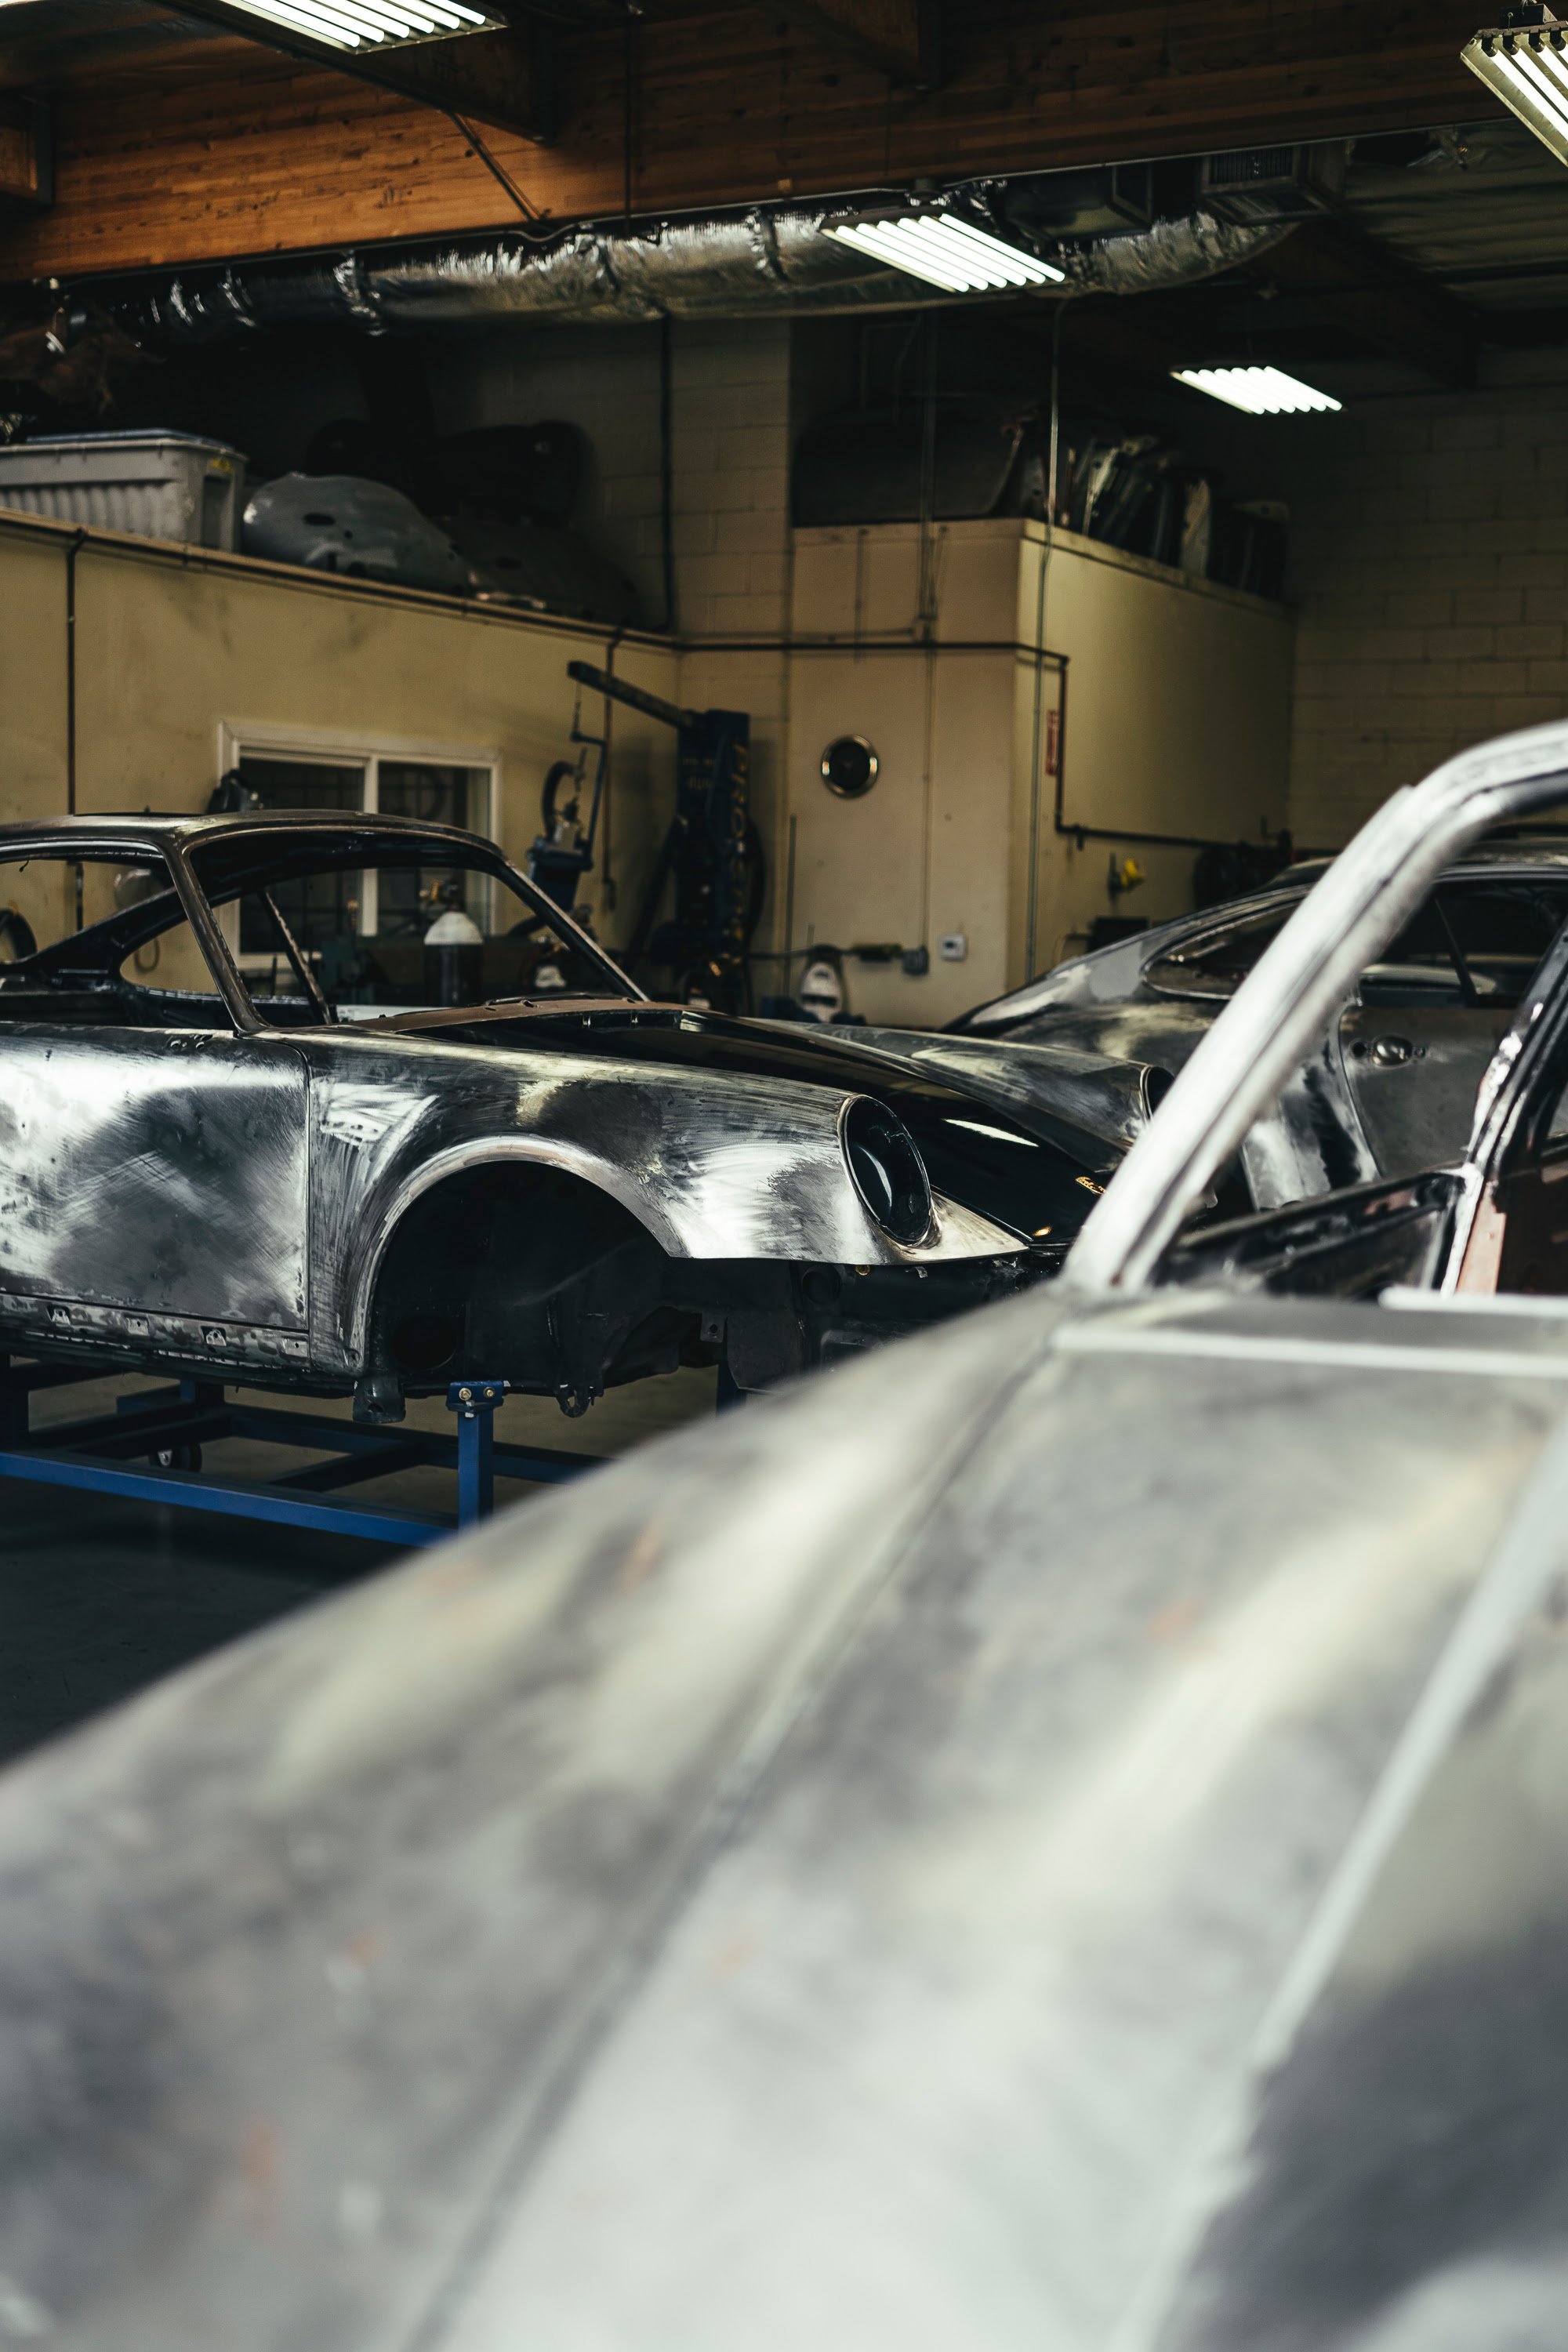 Cars awaiting restoration in the metal shop at CPR.